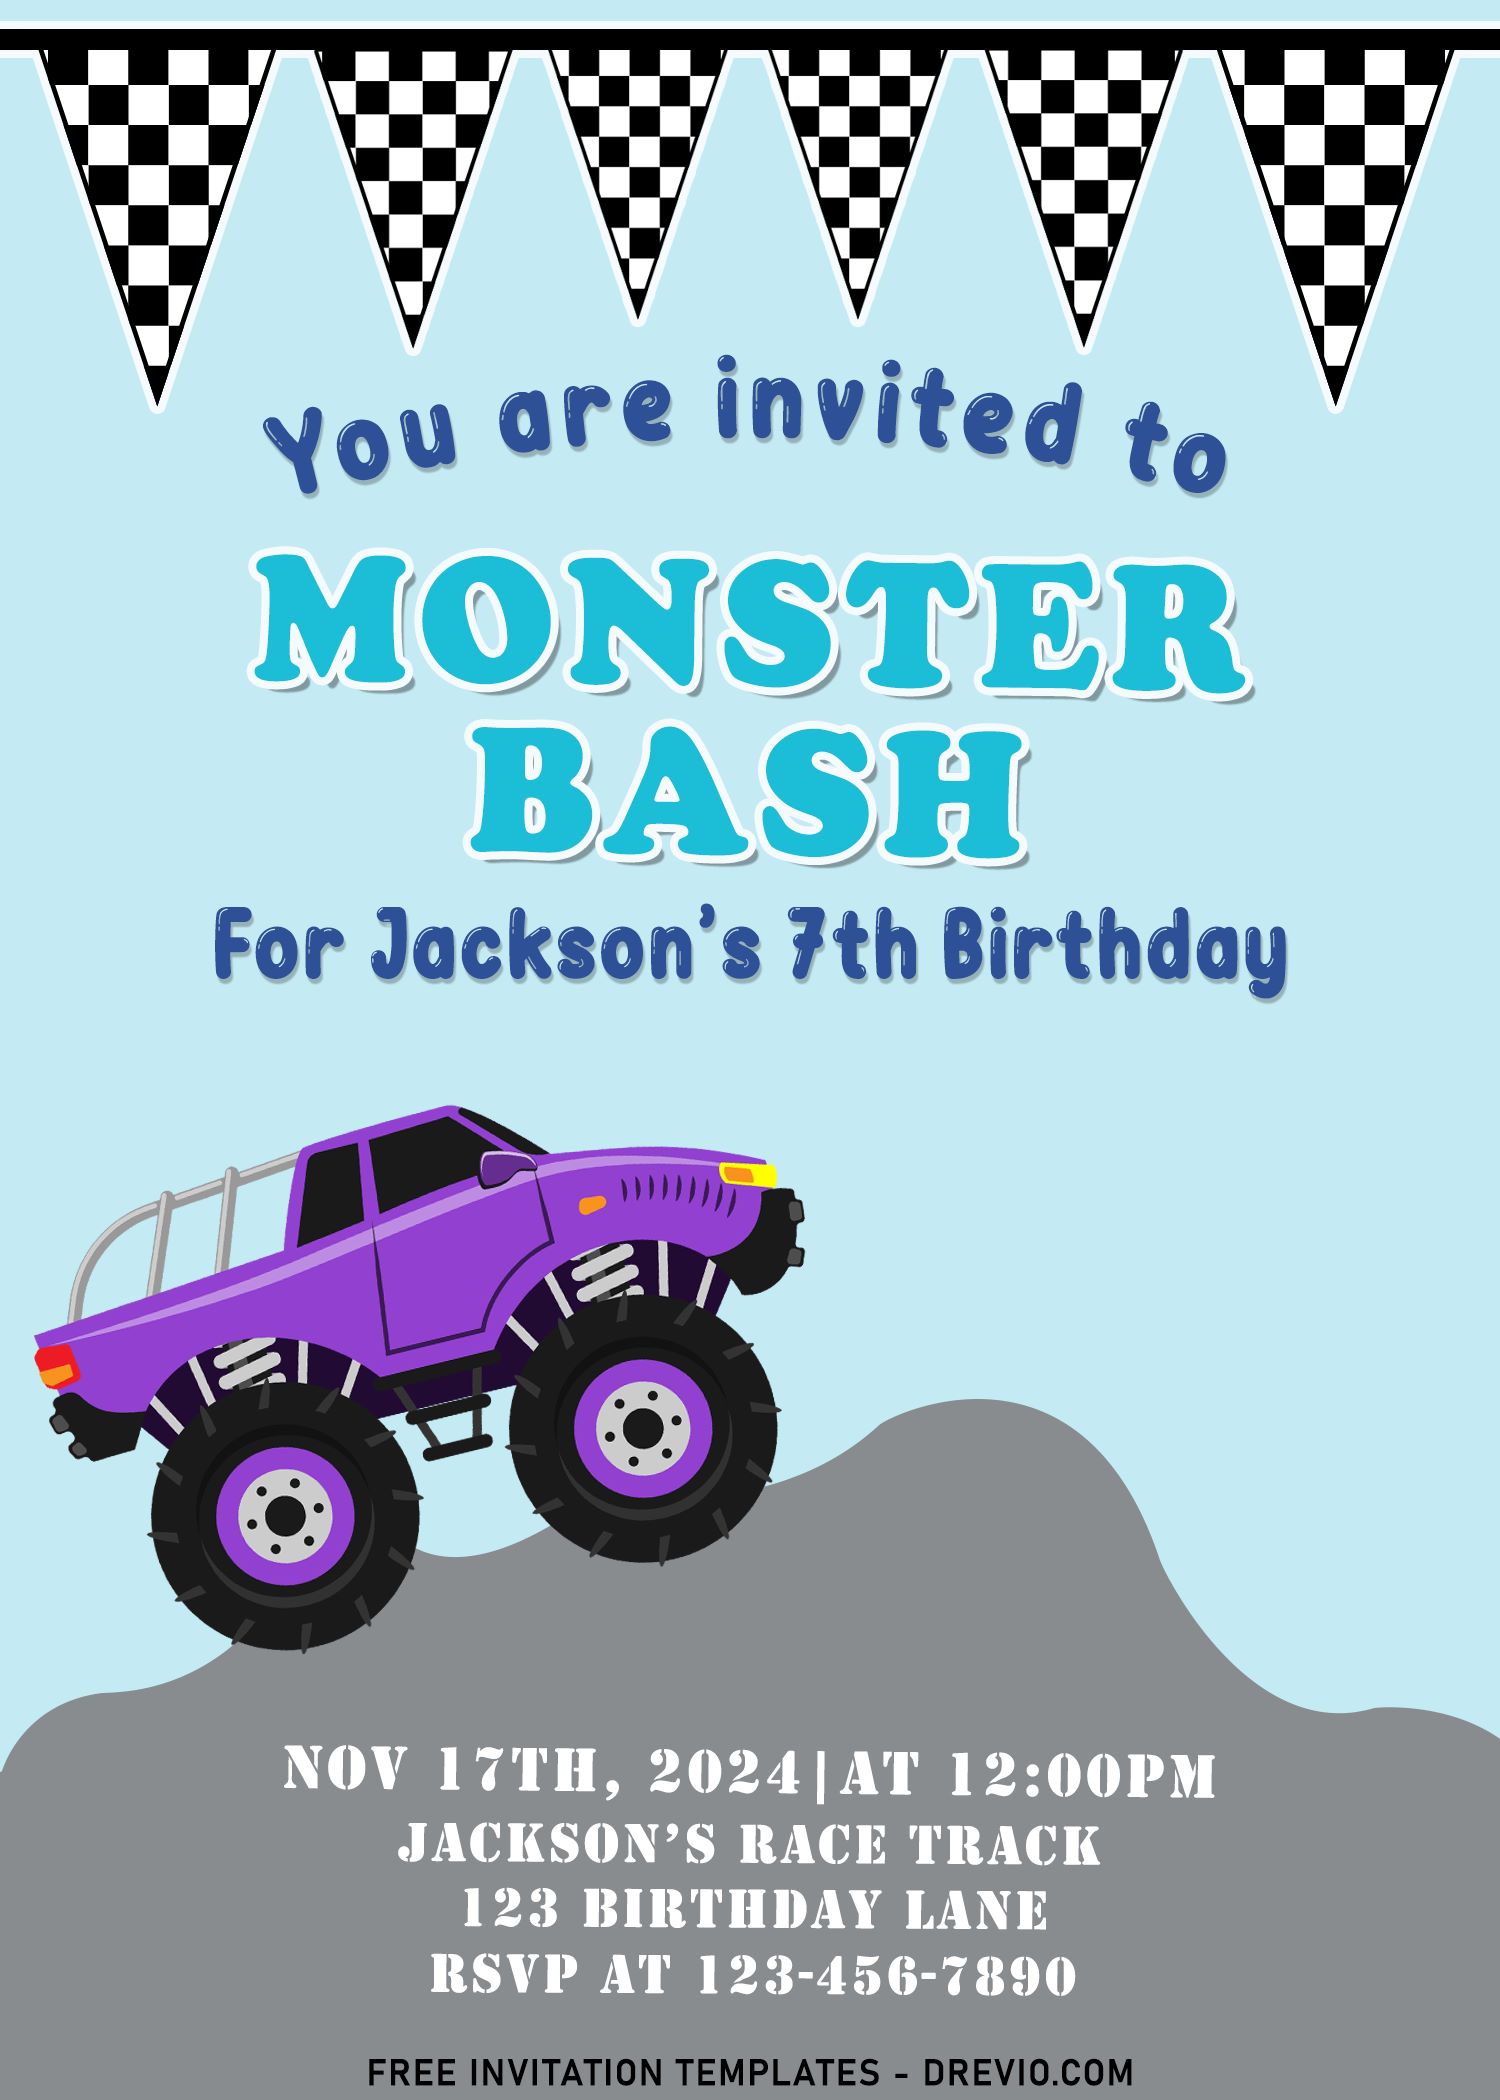 7 Awesome Buggy Birthday Bash Invitation Templates For Your Son S Birthday Download Hundreds Free Printable Birthday Invitation Templates